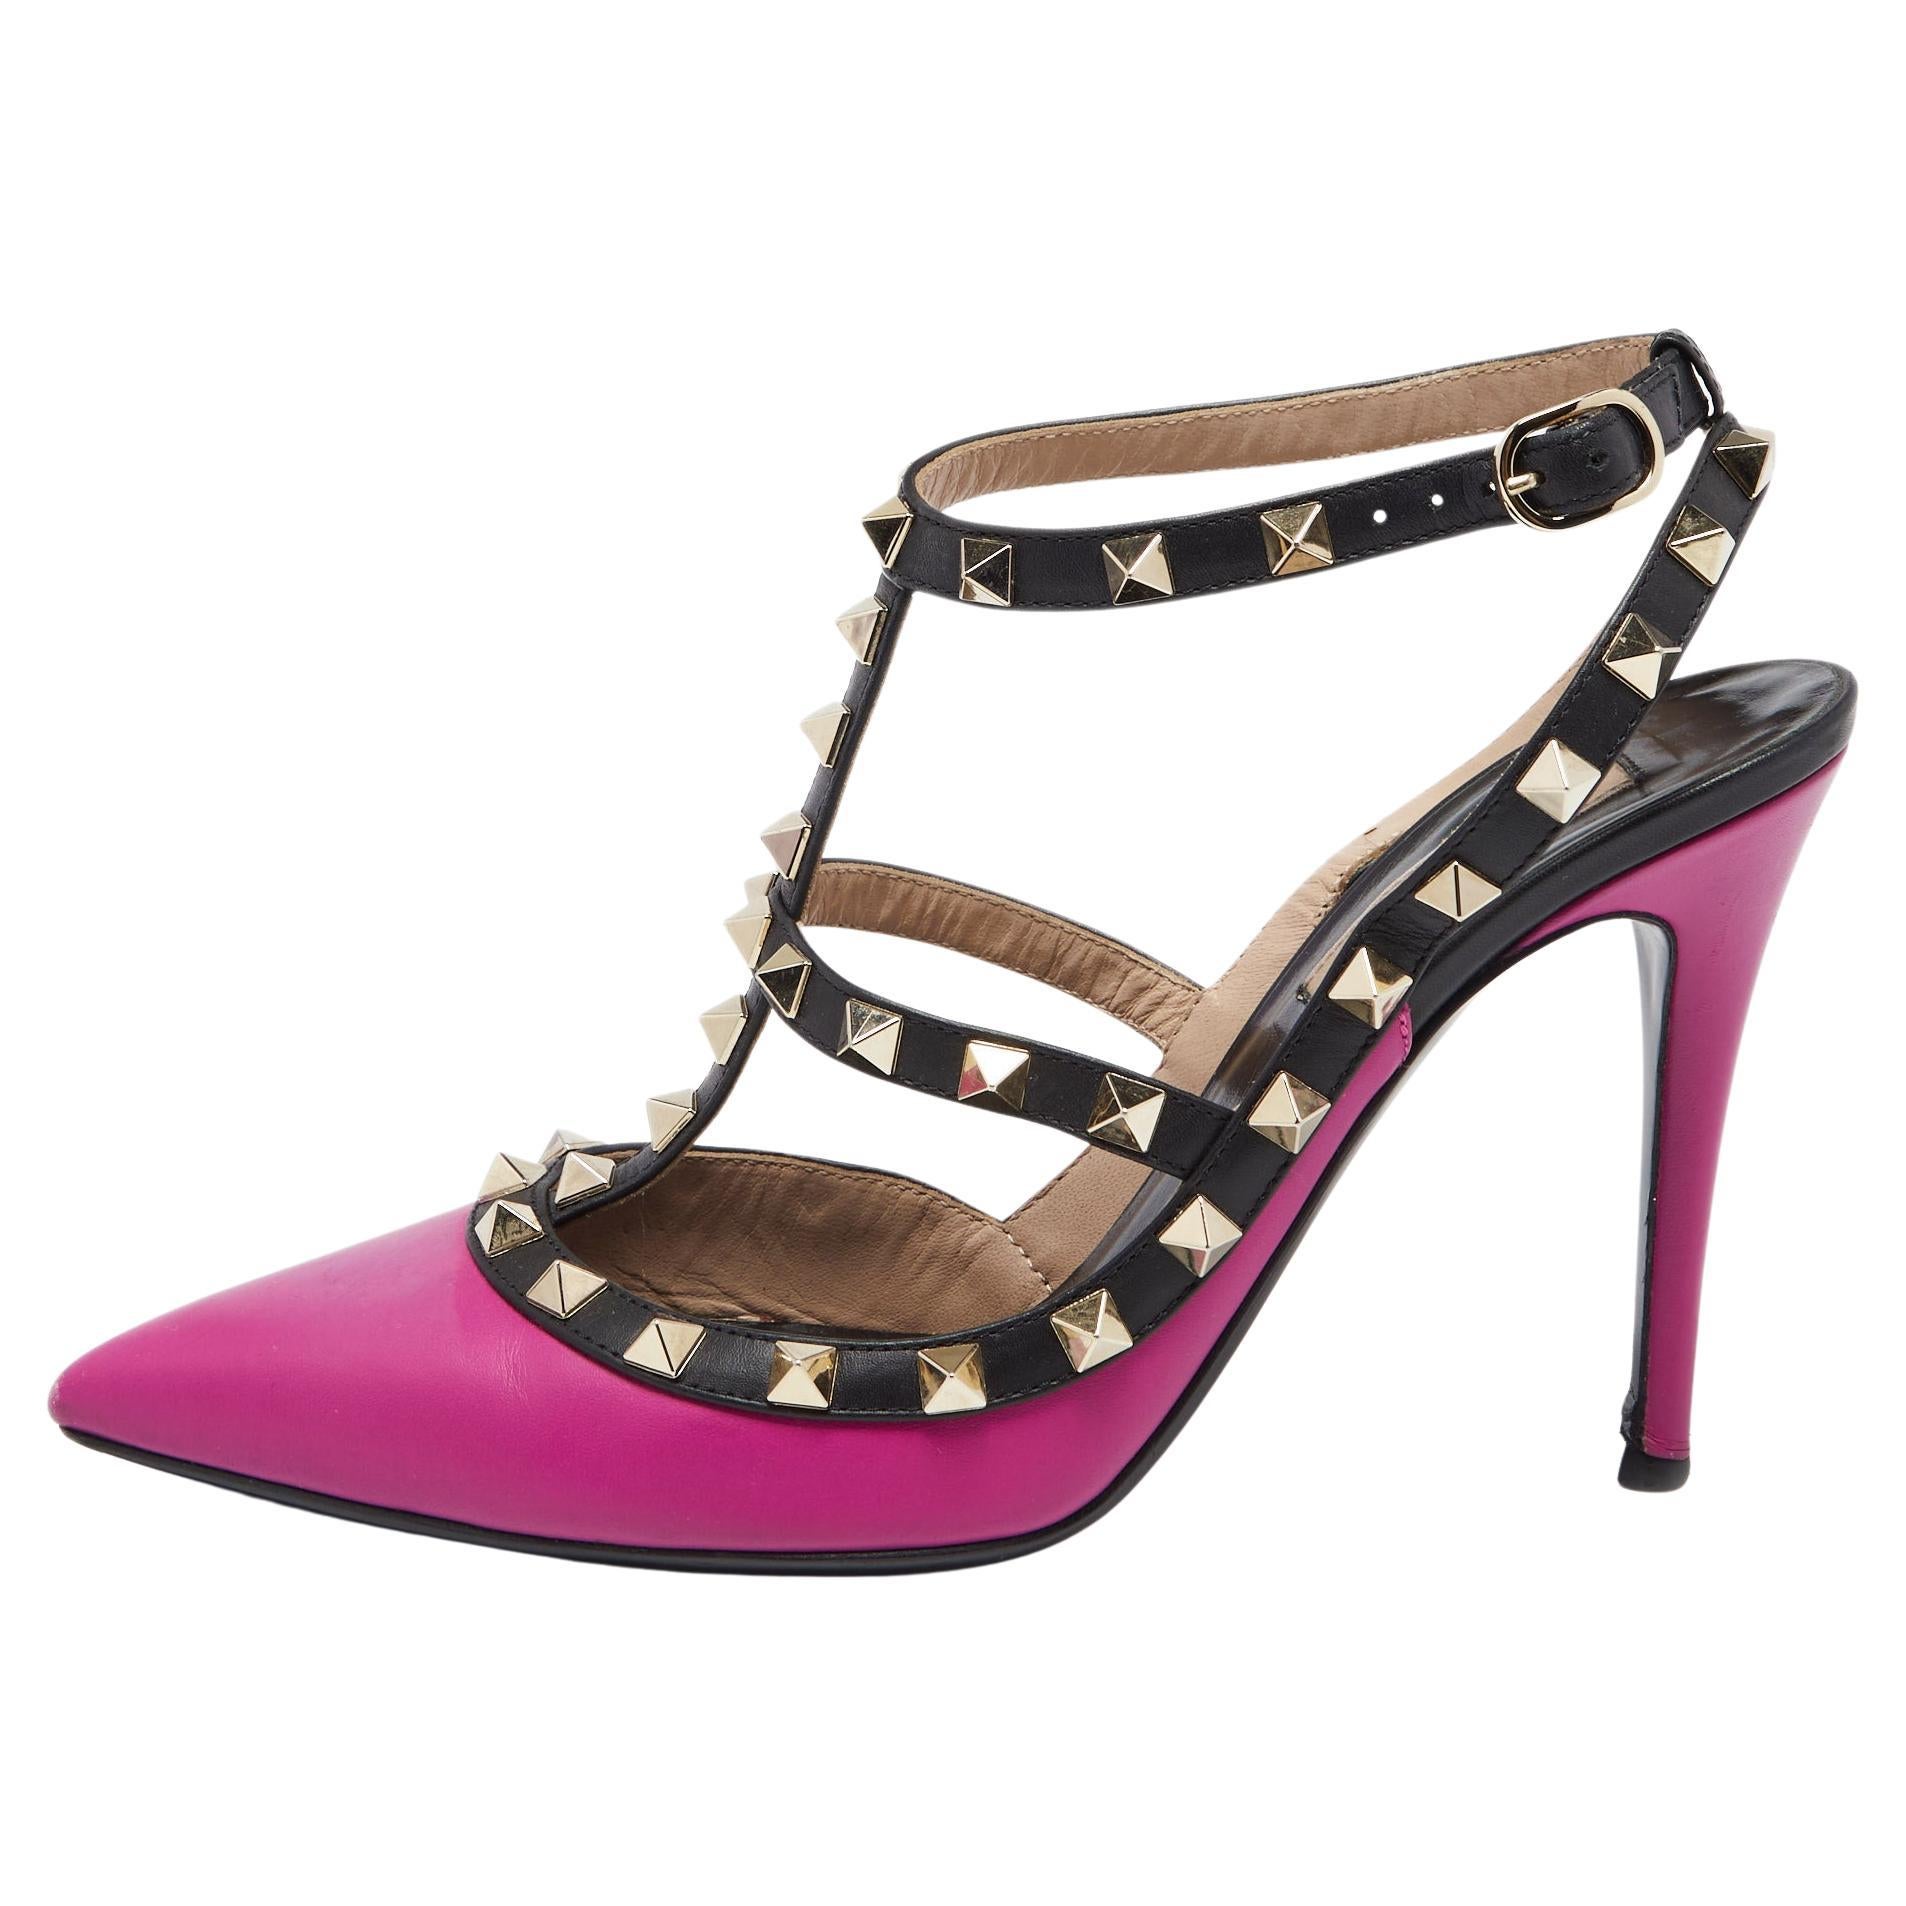 Valentino Black/Pink Leather Rockstud Strappy Pointed Toe Sandals Size 38